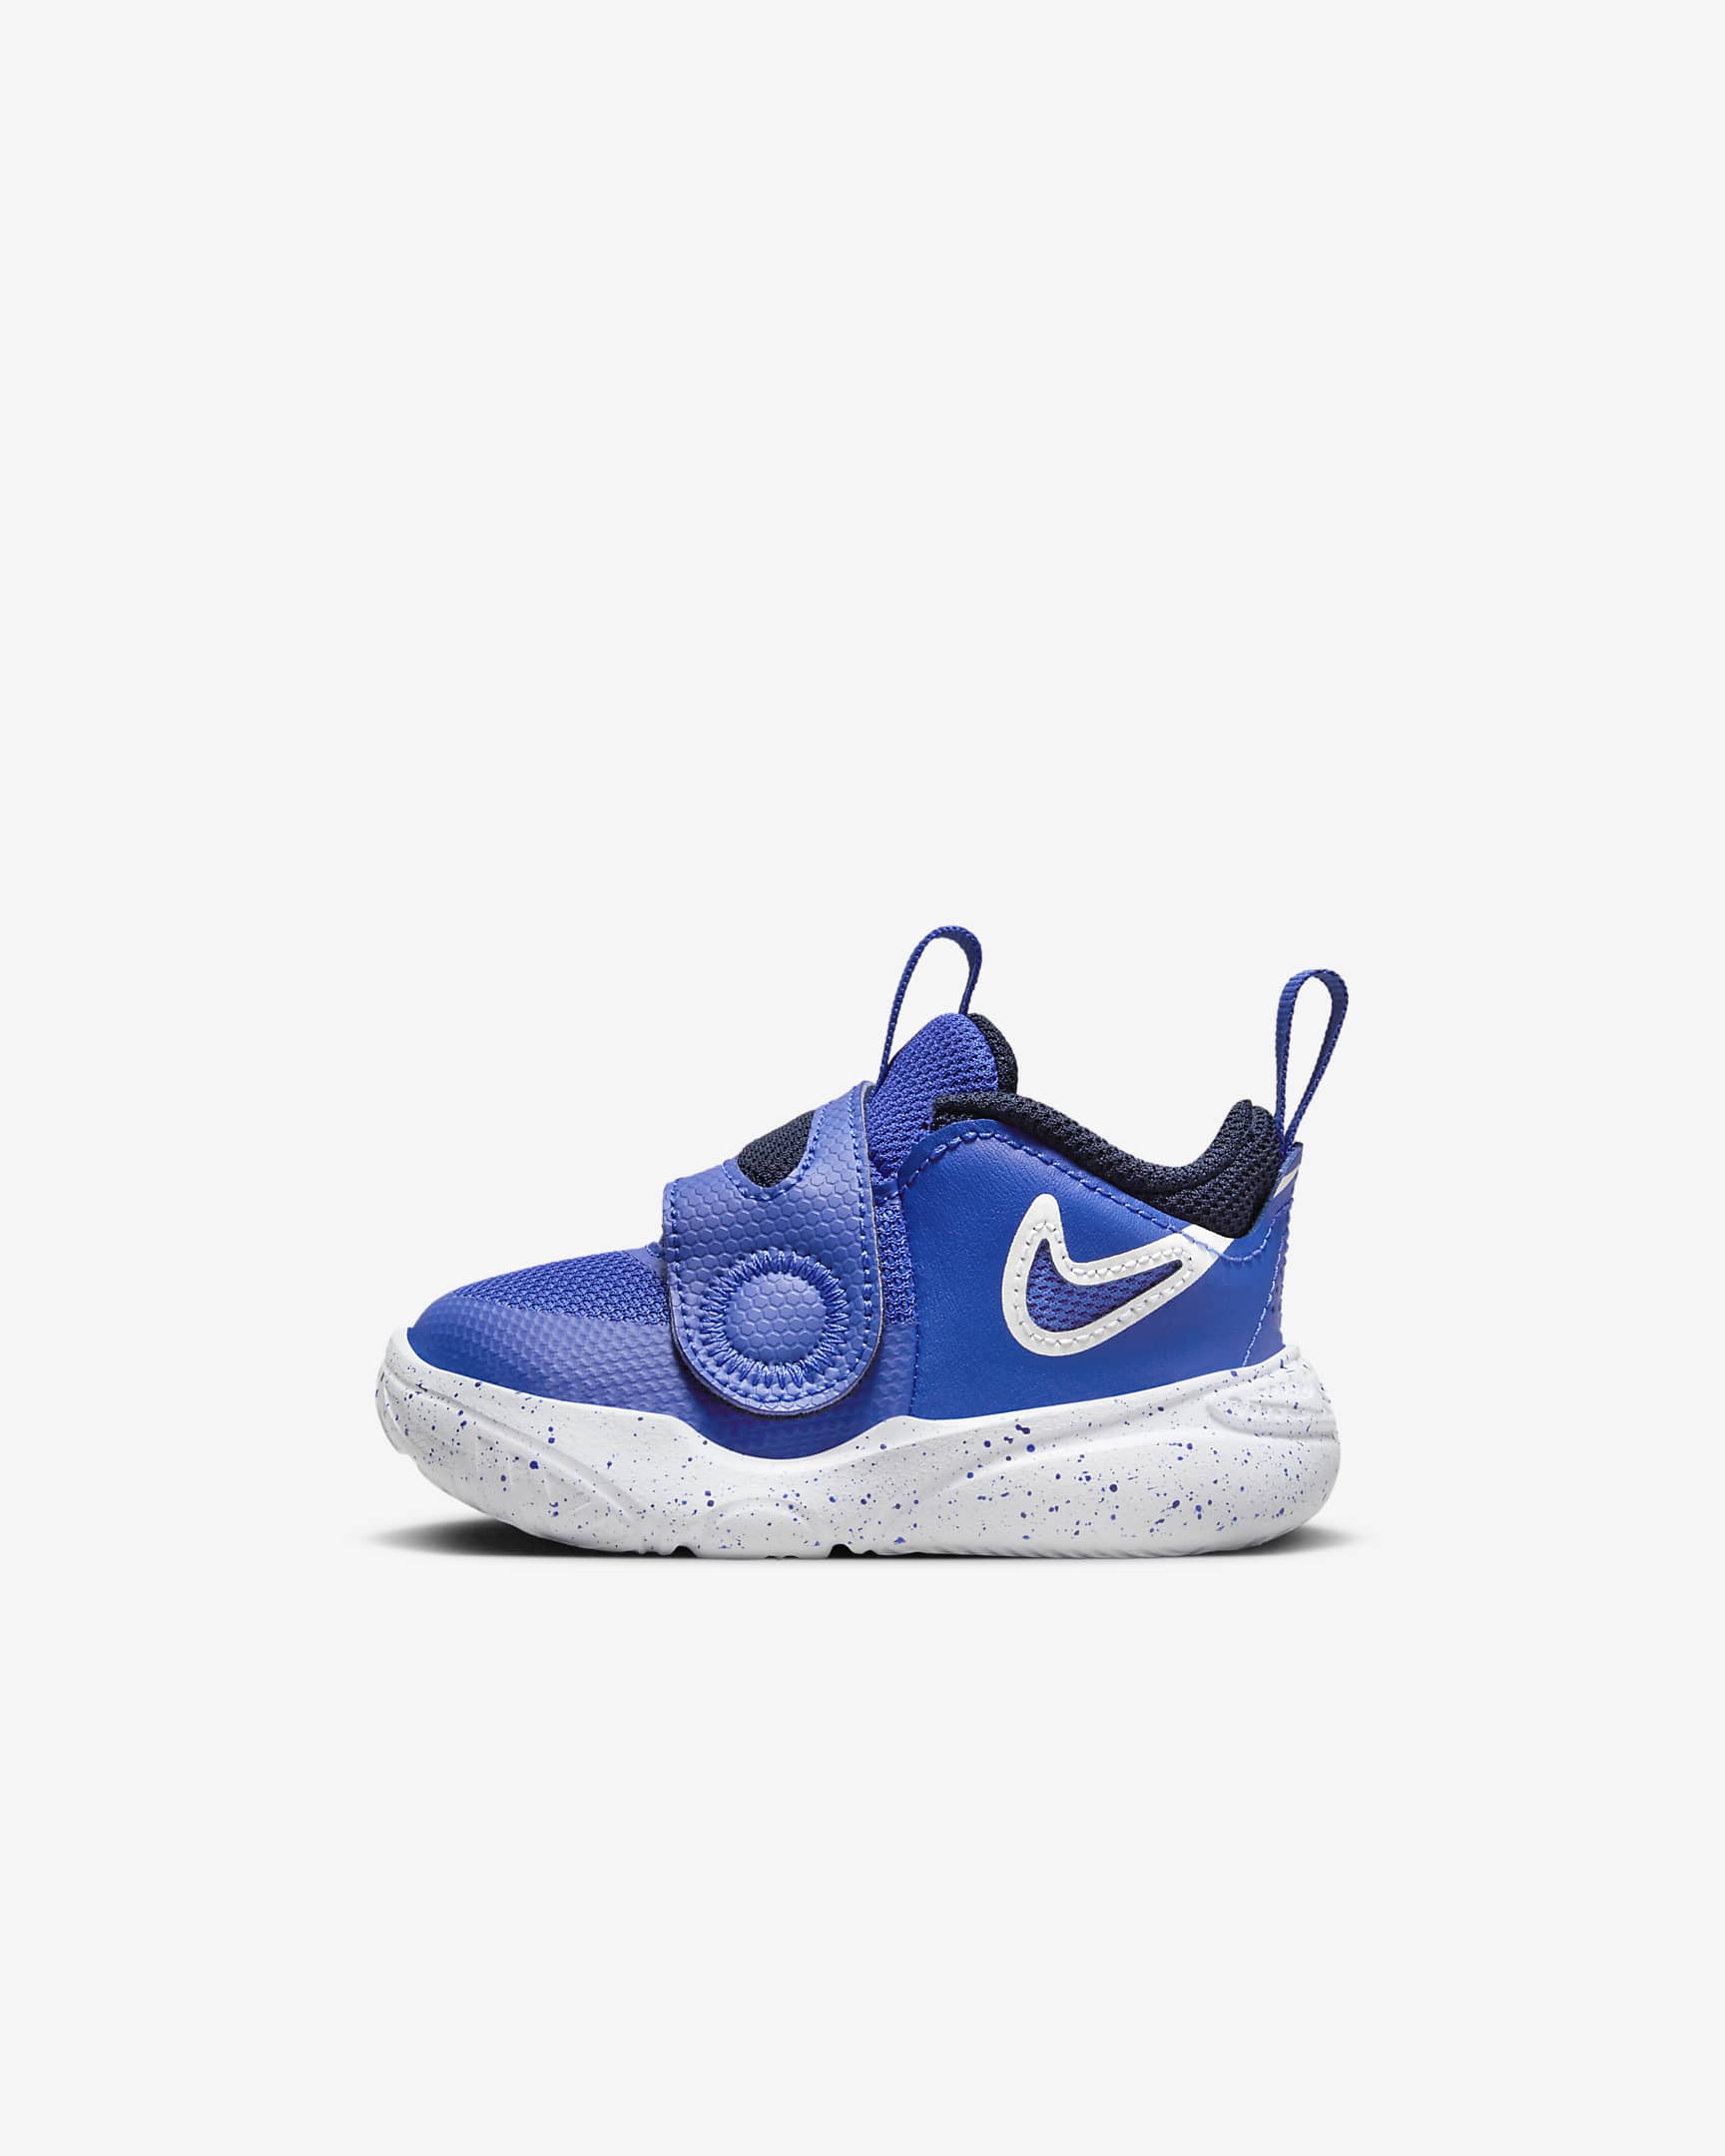 Nike Team Hustle D 11 Baby/Toddler Shoes. Nike MY